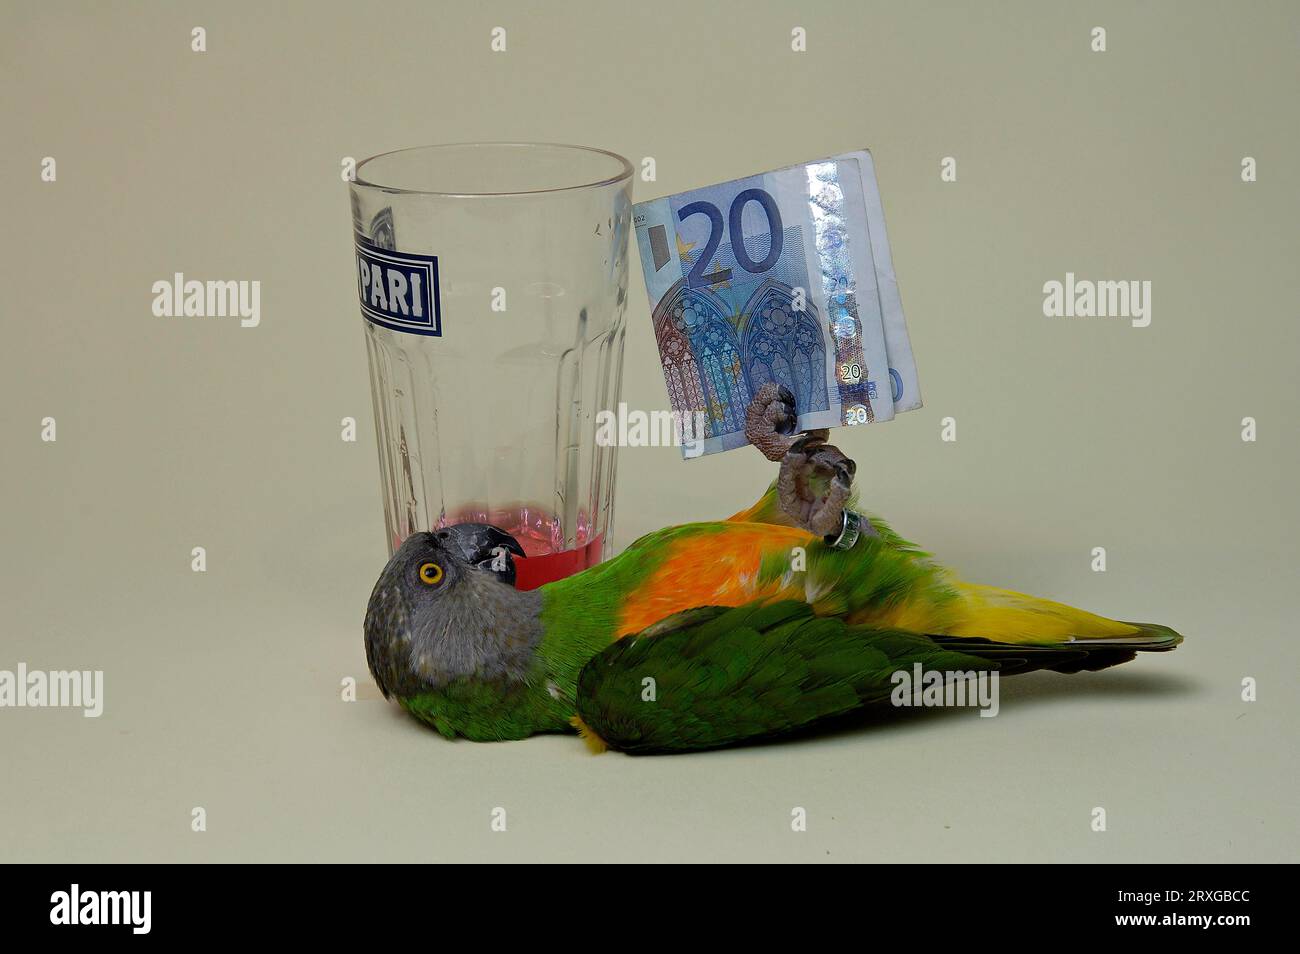 Drunke, Parrot (Poicephalus senegalus) lying on his back holding money with feet beneath glass of alcohol, Drunk Parrot lying on his back holding Stock Photo